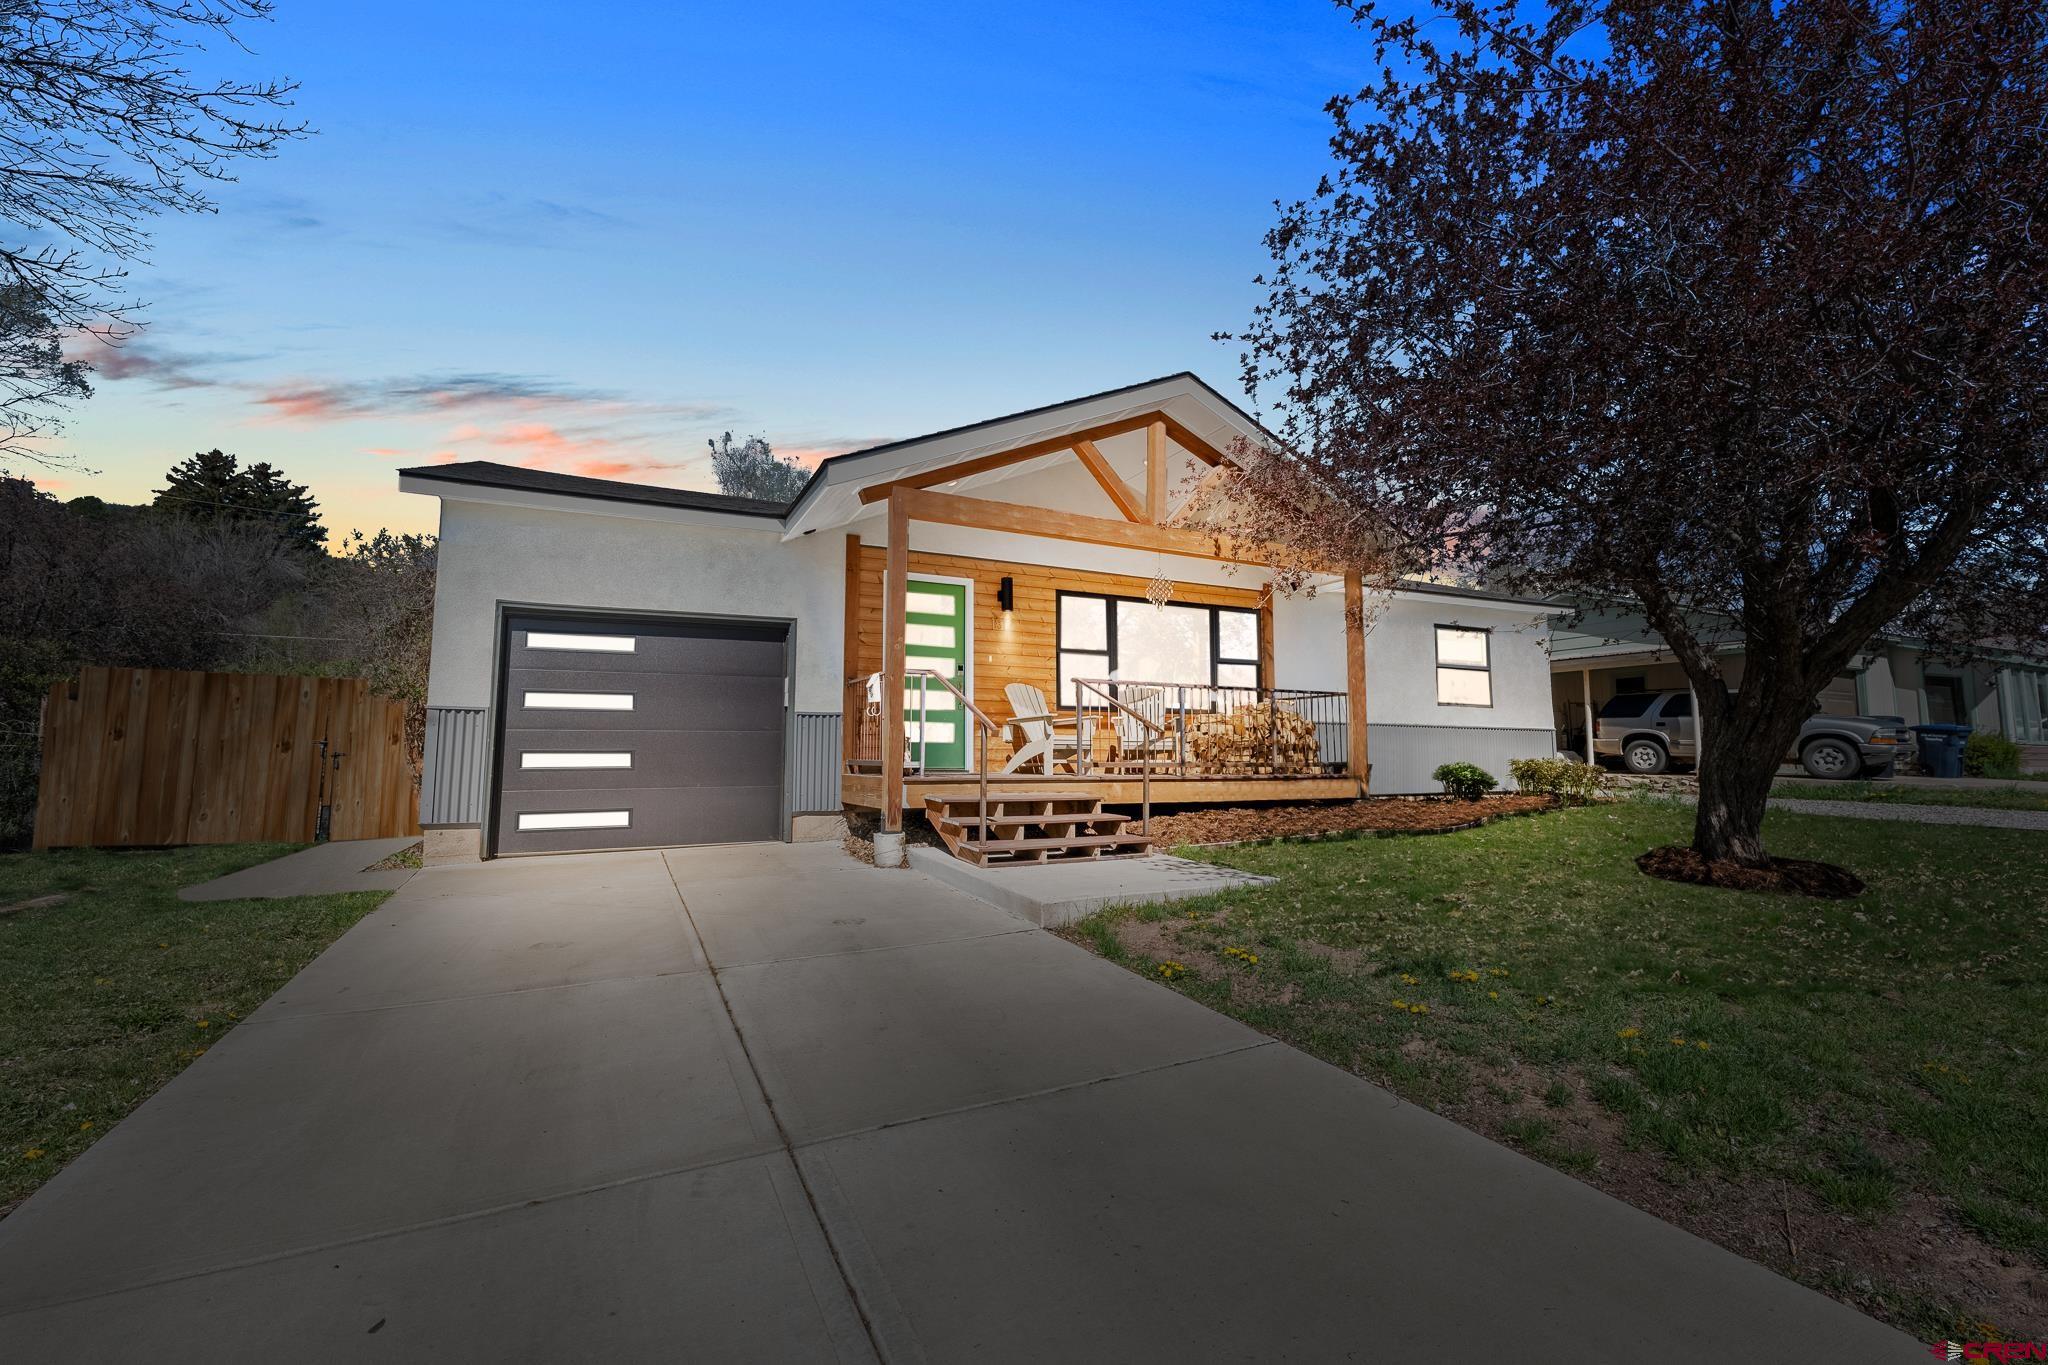 Photo of 1819 Forest Ave in Durango, CO